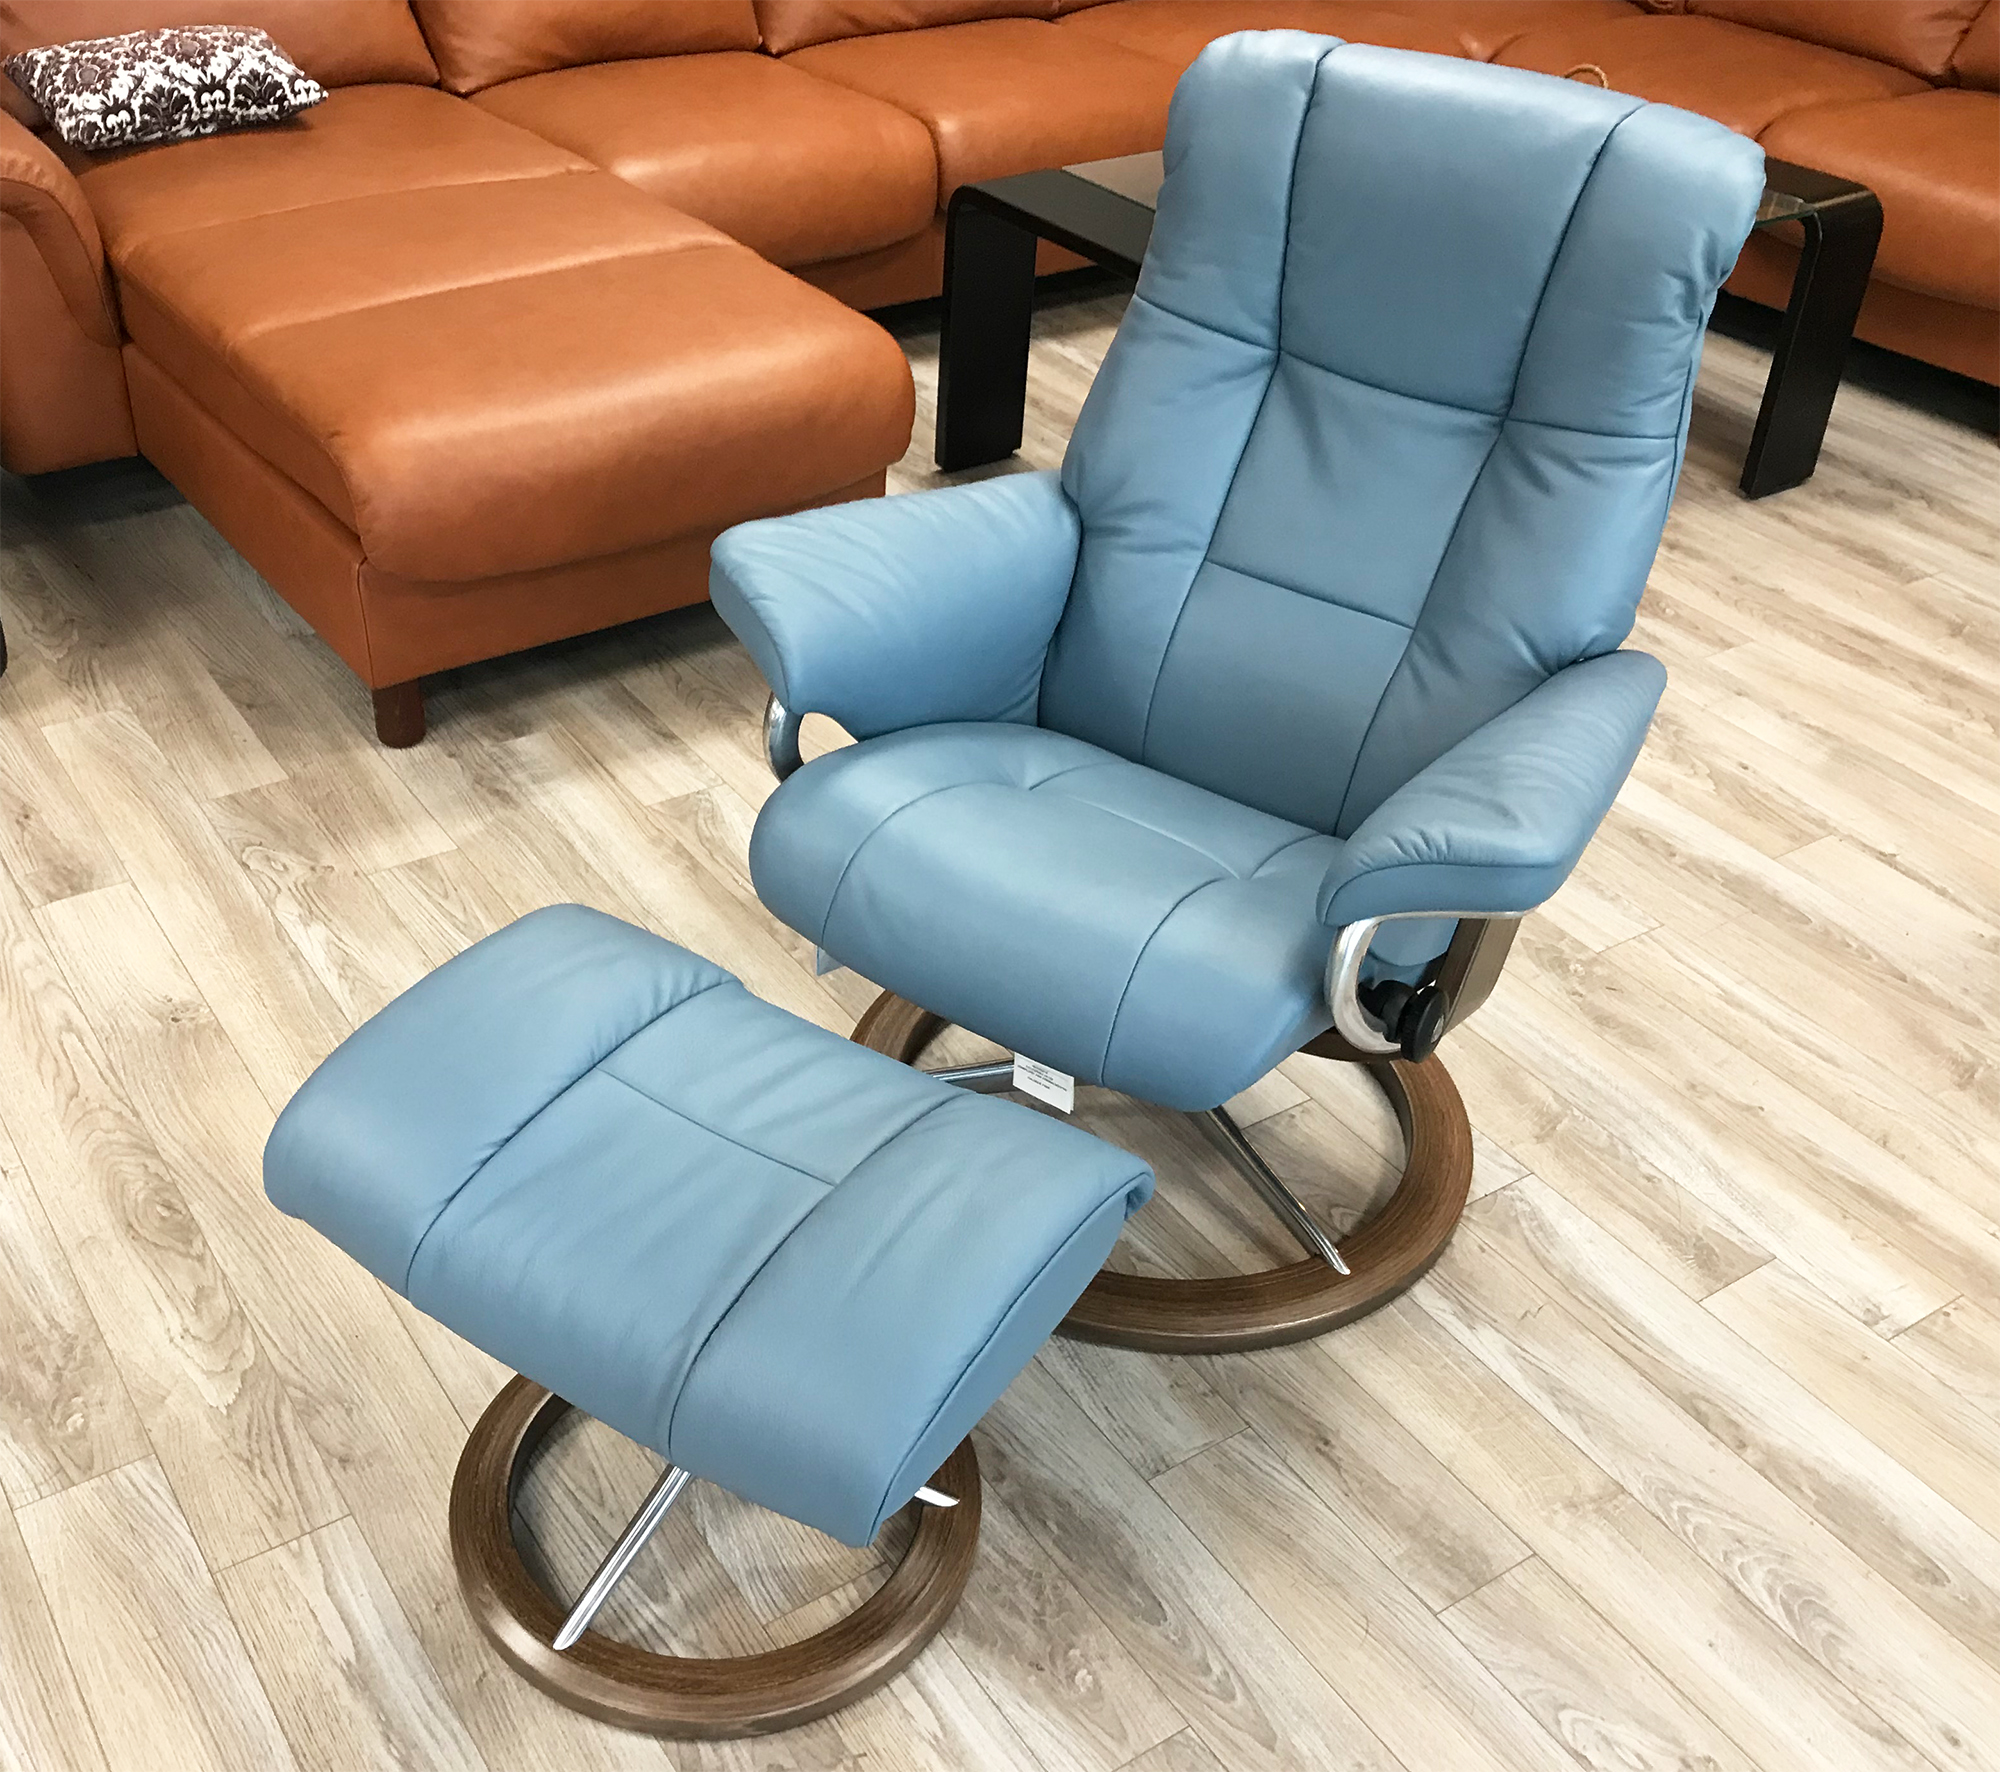 Stressless Mayfair Paloma Sparrow Blue Leather Recliner Chair and Ottoman by Ekornes